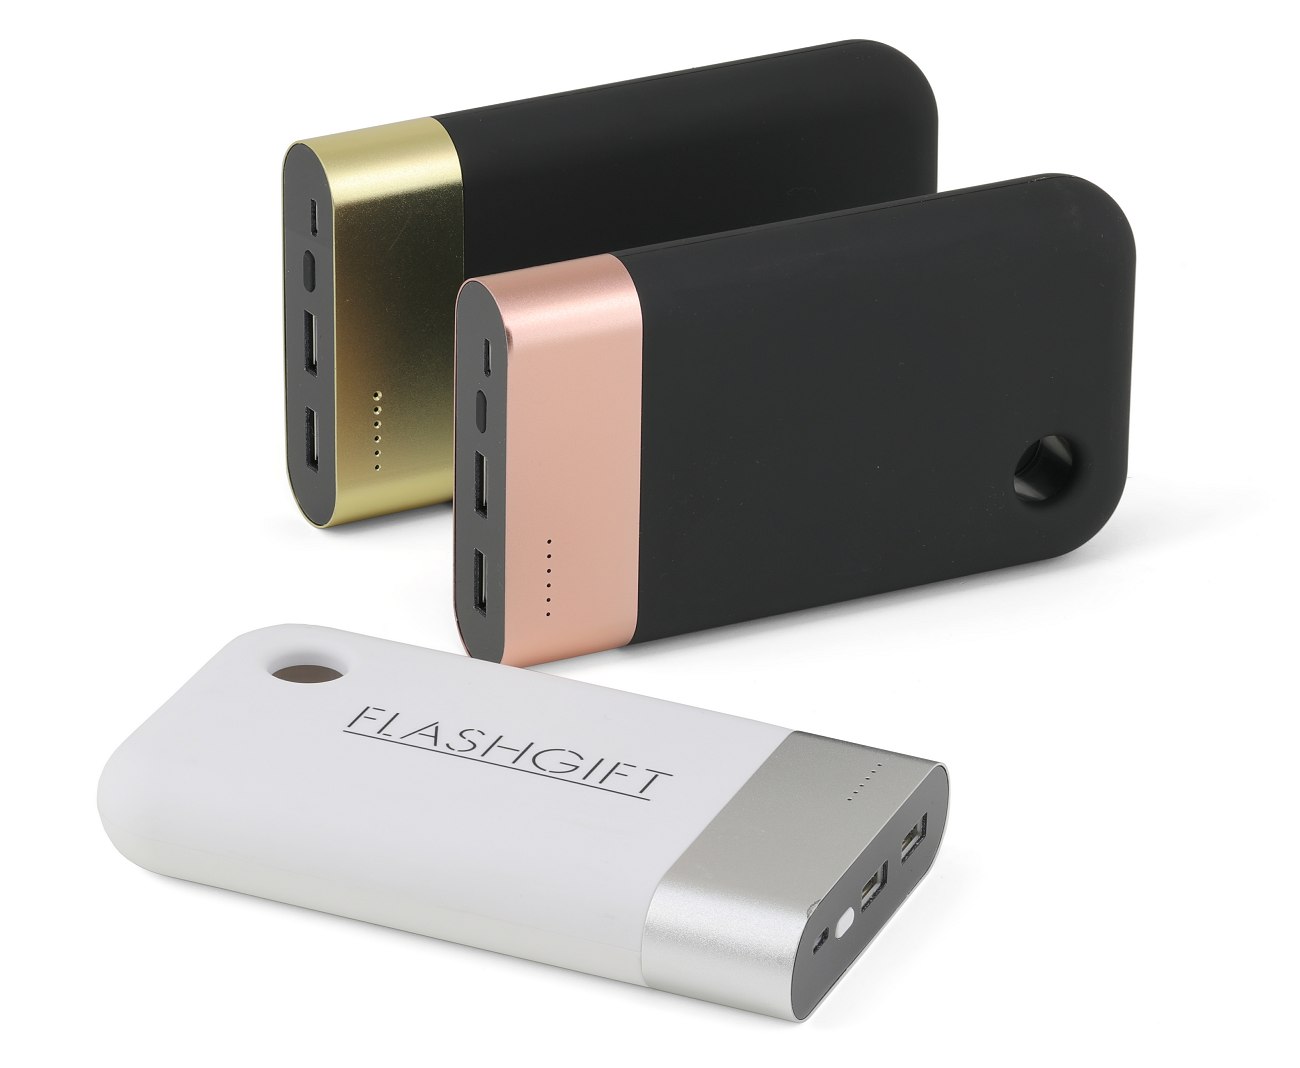 Three large power banks, black and white with metal bands silver, gold and copper colour